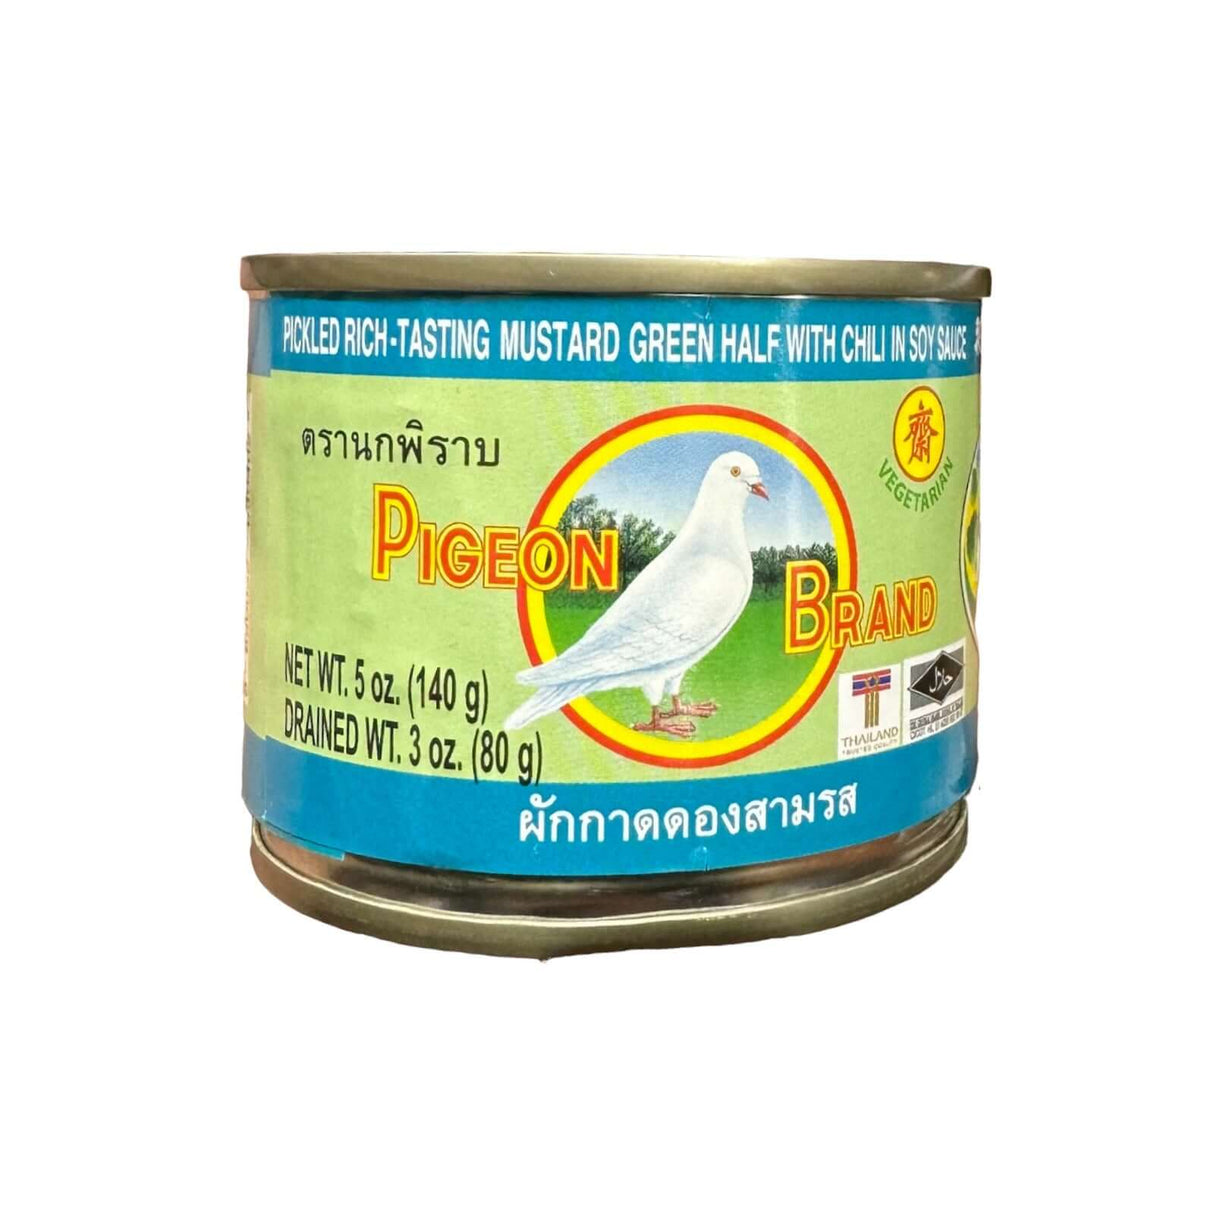 Pigeon Brand Pickled Rich-Tasting Mustard Green Half with Chili in Soy Sauce